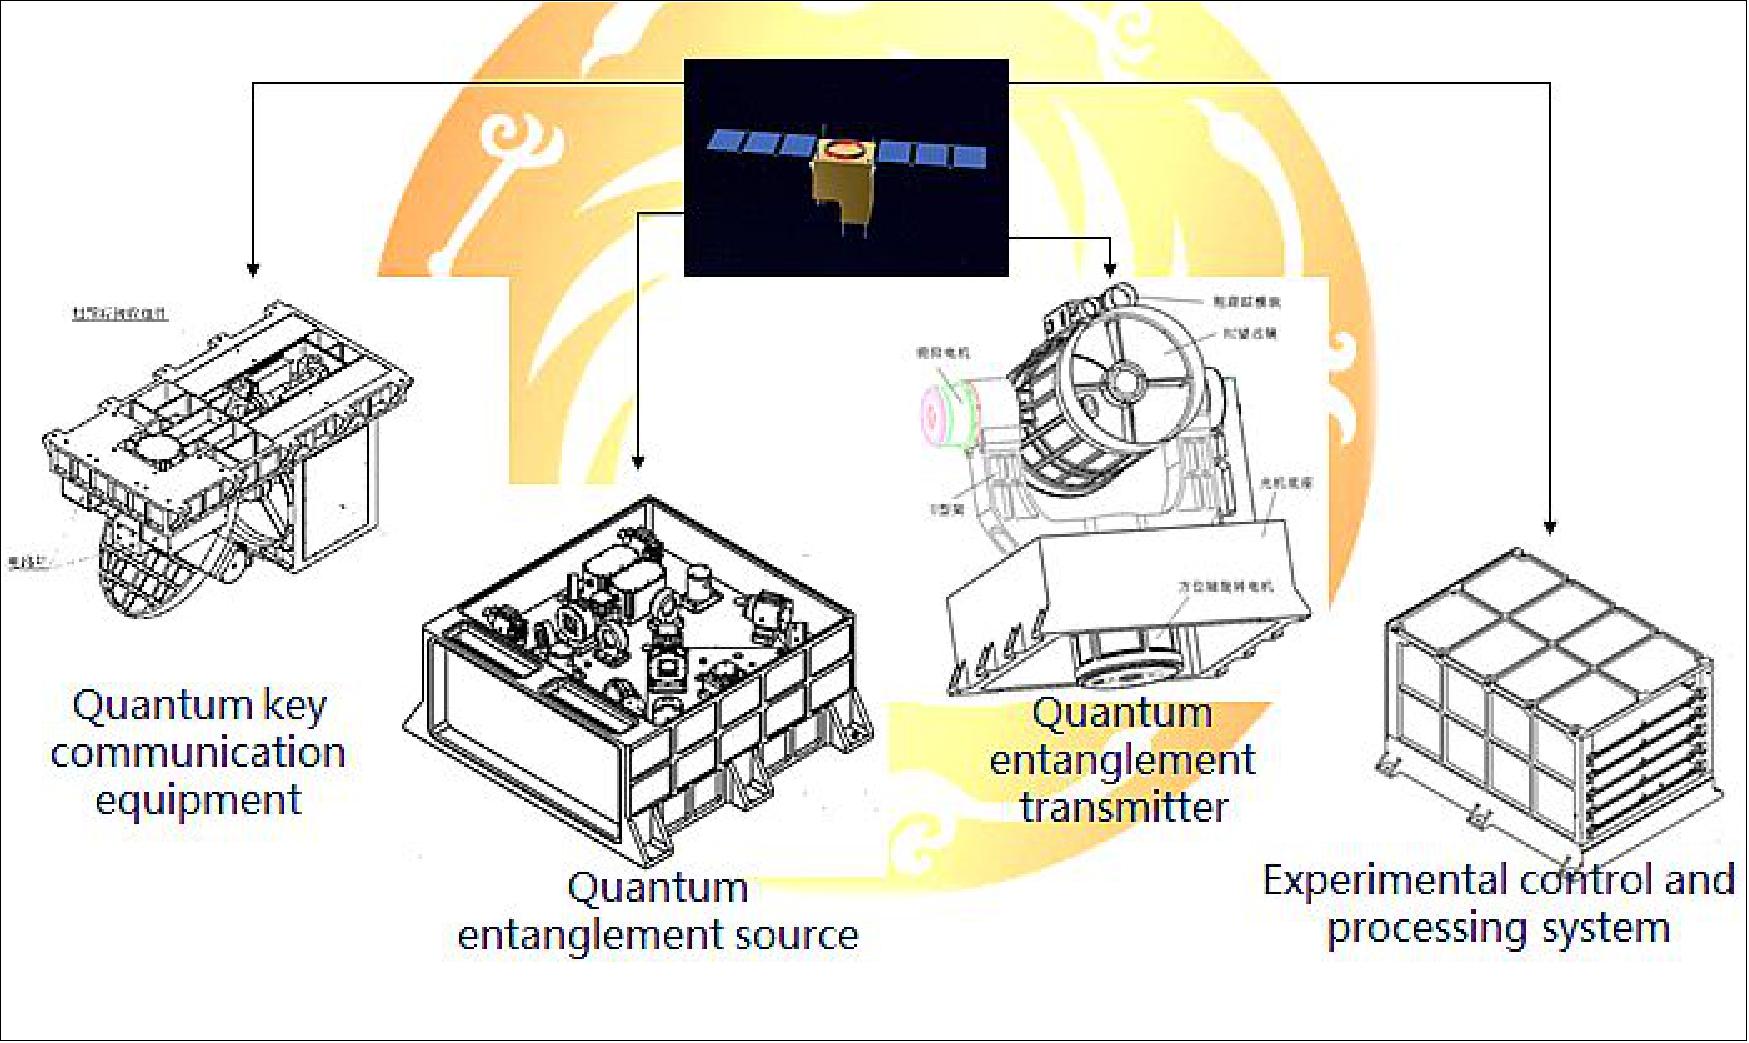 Figure 14: Illustration of the QKD devices in support of entangled quantum communications (image credit: NSSC) 21) 22)